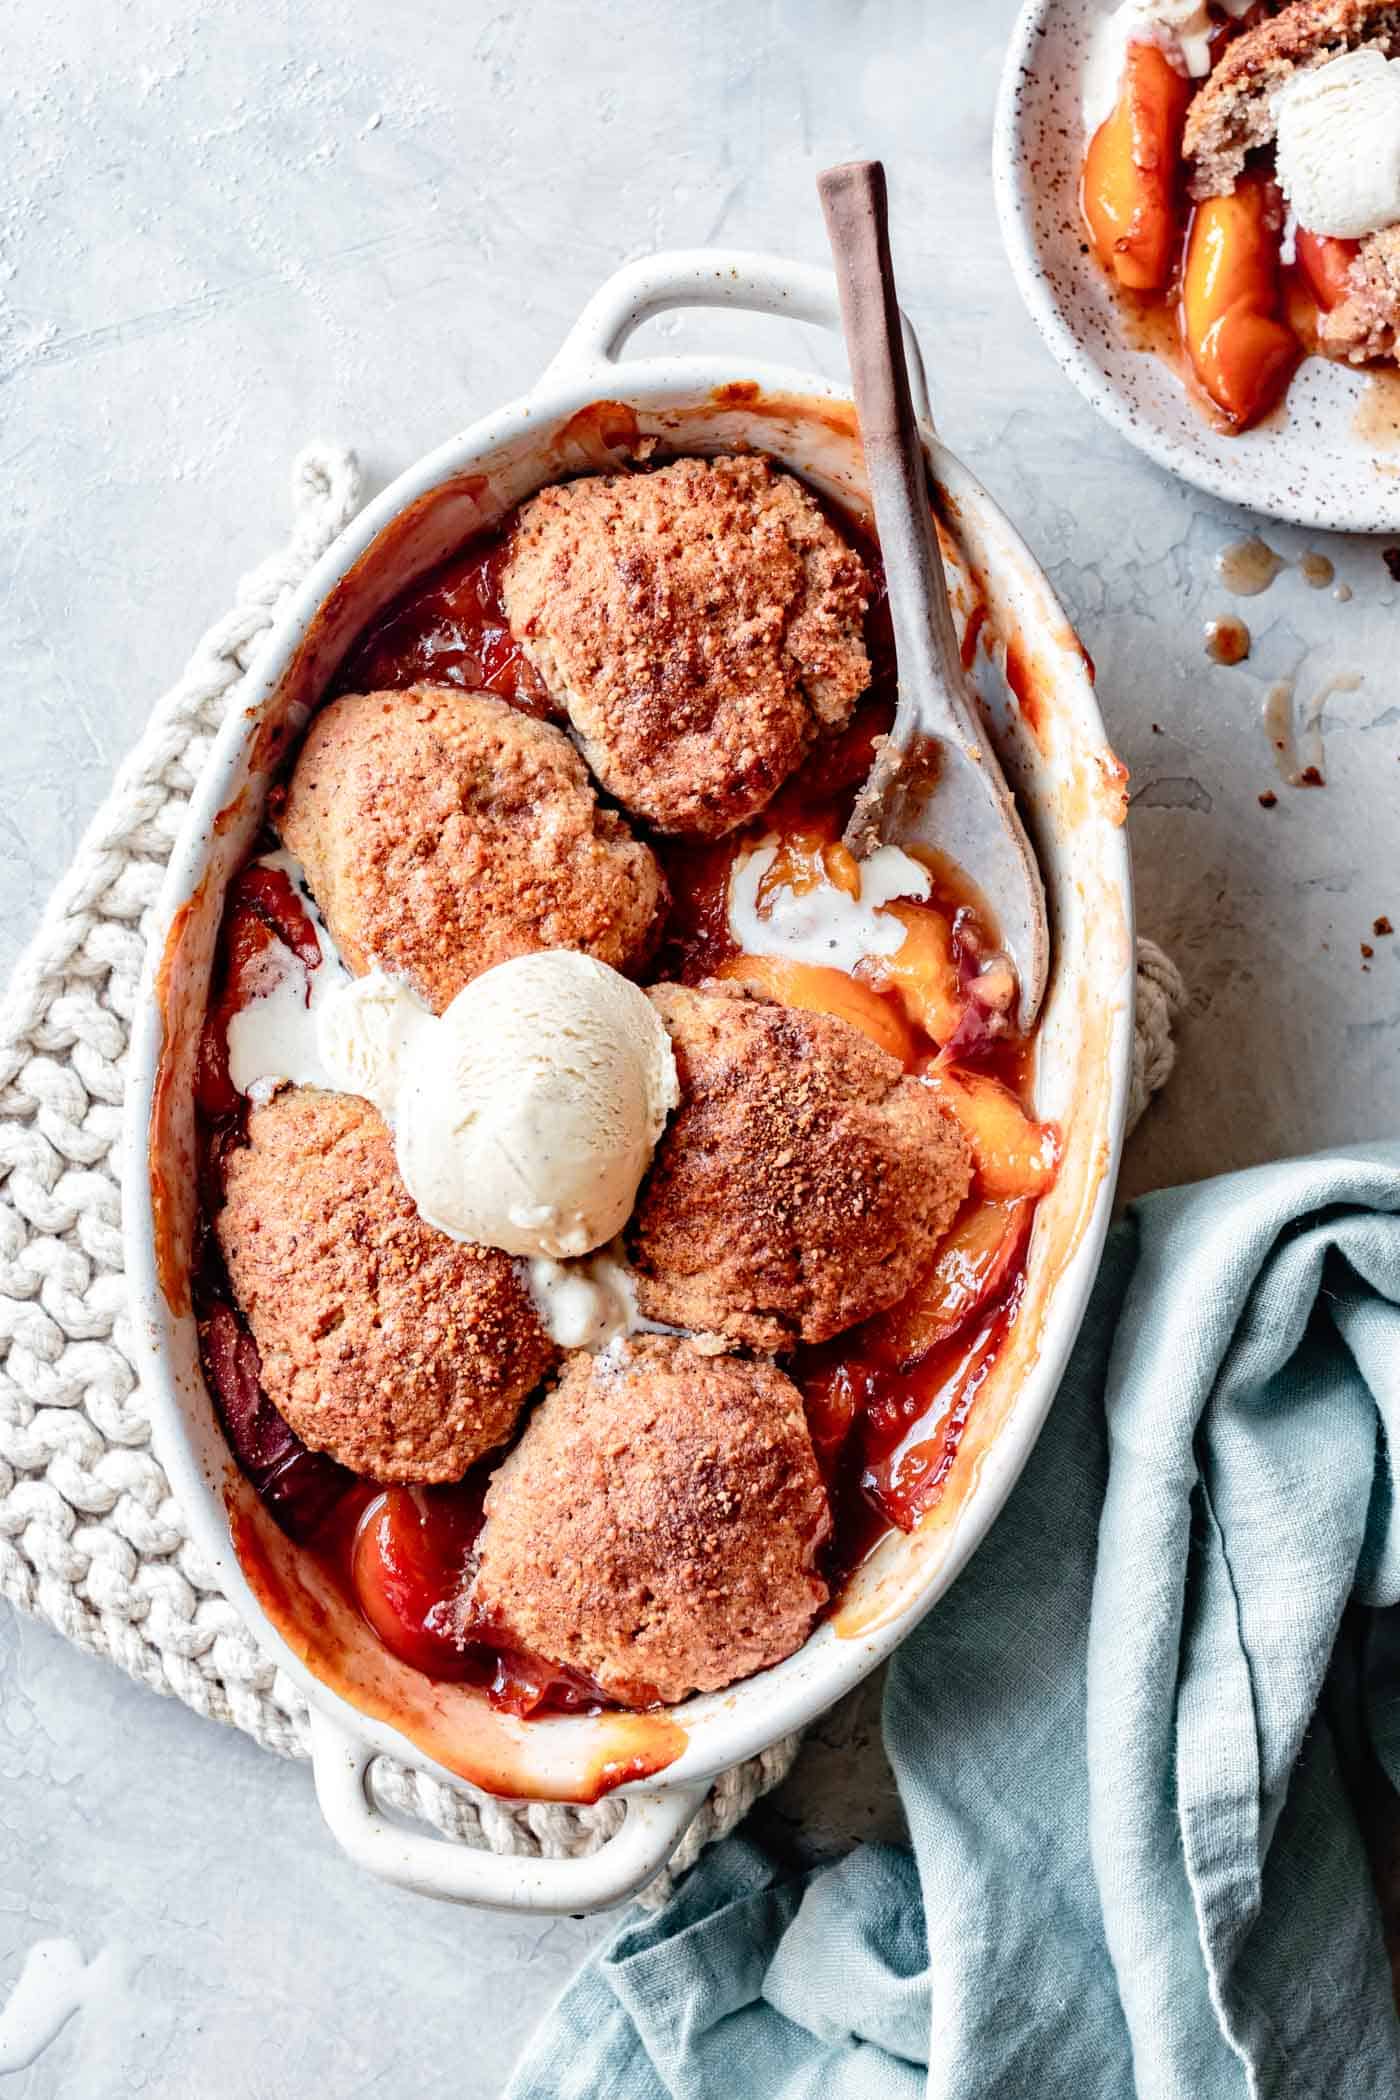 Vegan paleo peach cobbler with almond flour biscuits topped with ice cream